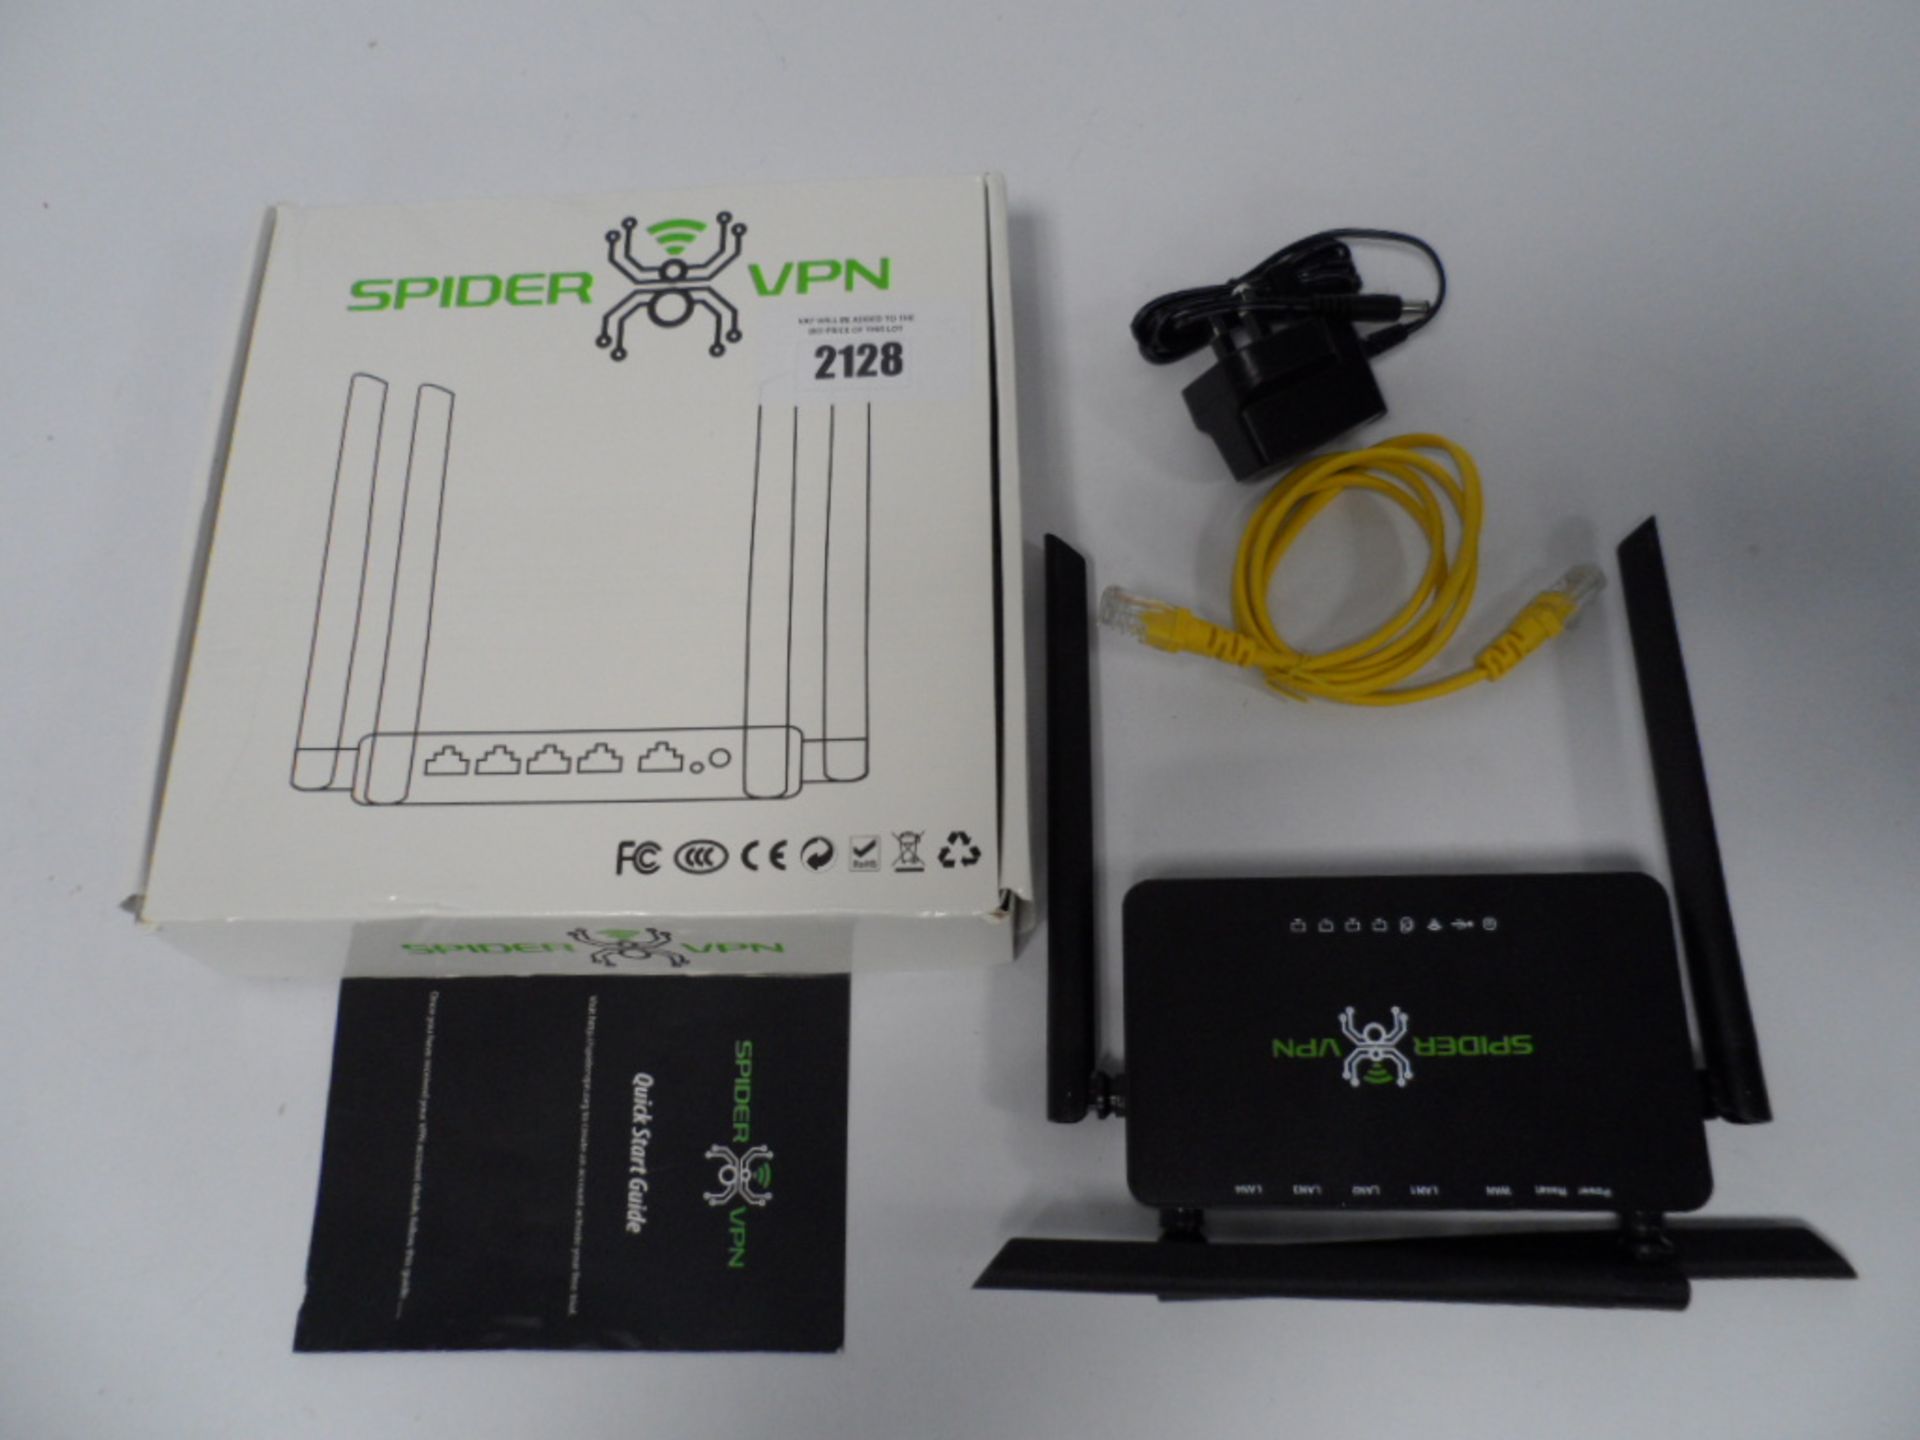 Spider VPN router boxed with power supply and network cable.